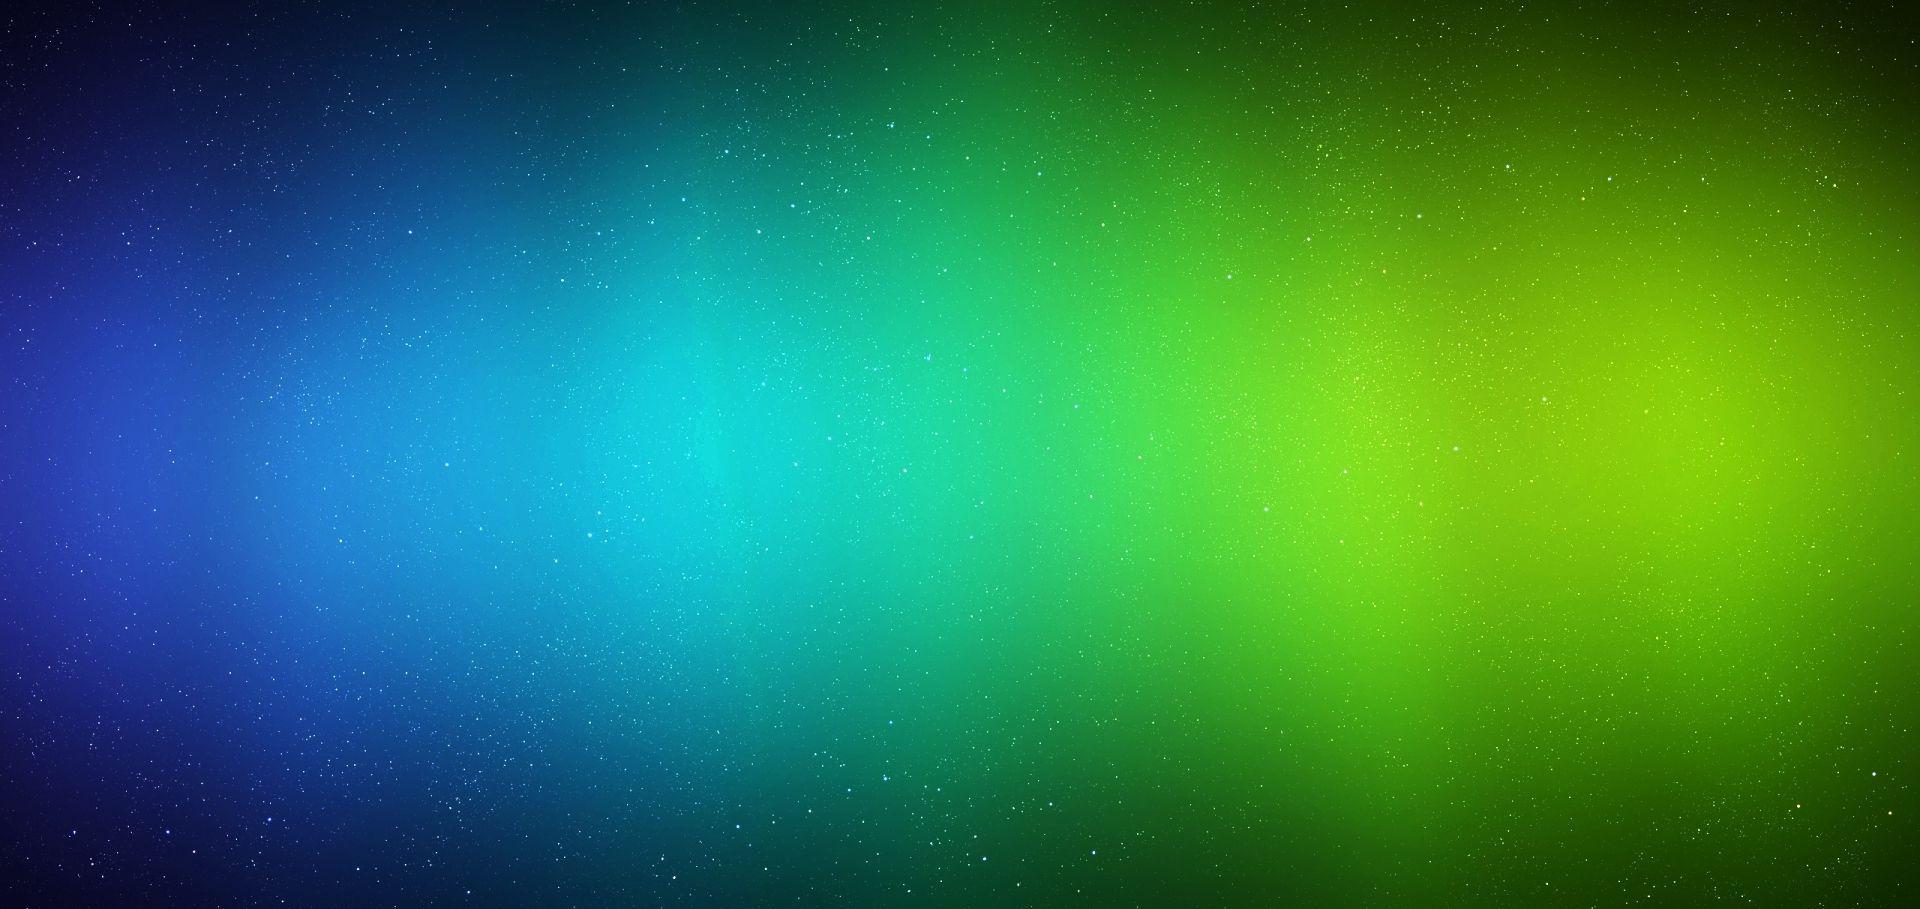 Abstract Wallpaper Blue And Green. Free Image